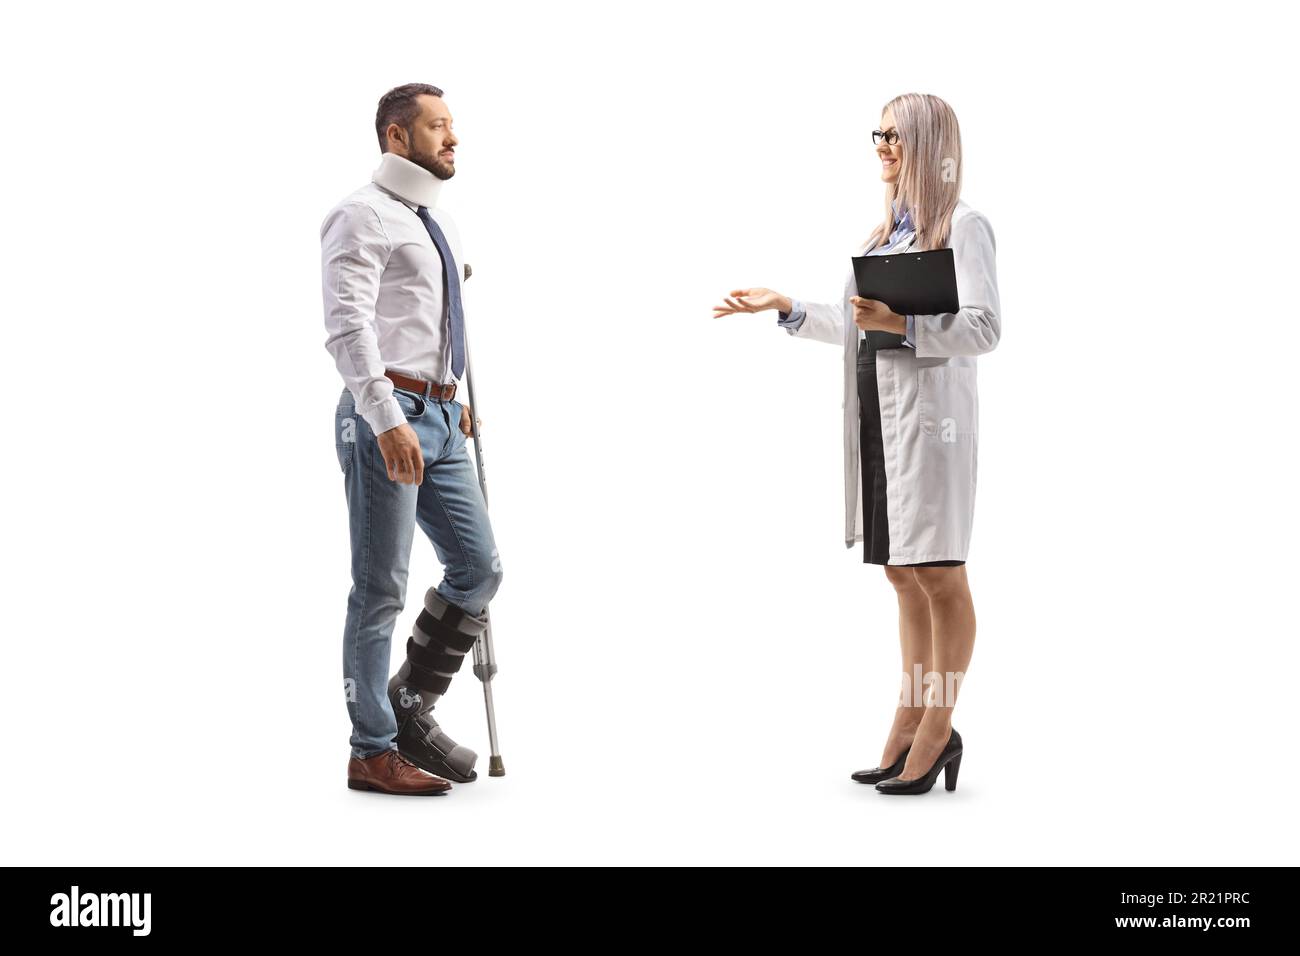 Female doctor talking to an injured man with an orthopedic boot and cervical collar isolated on white background Stock Photo